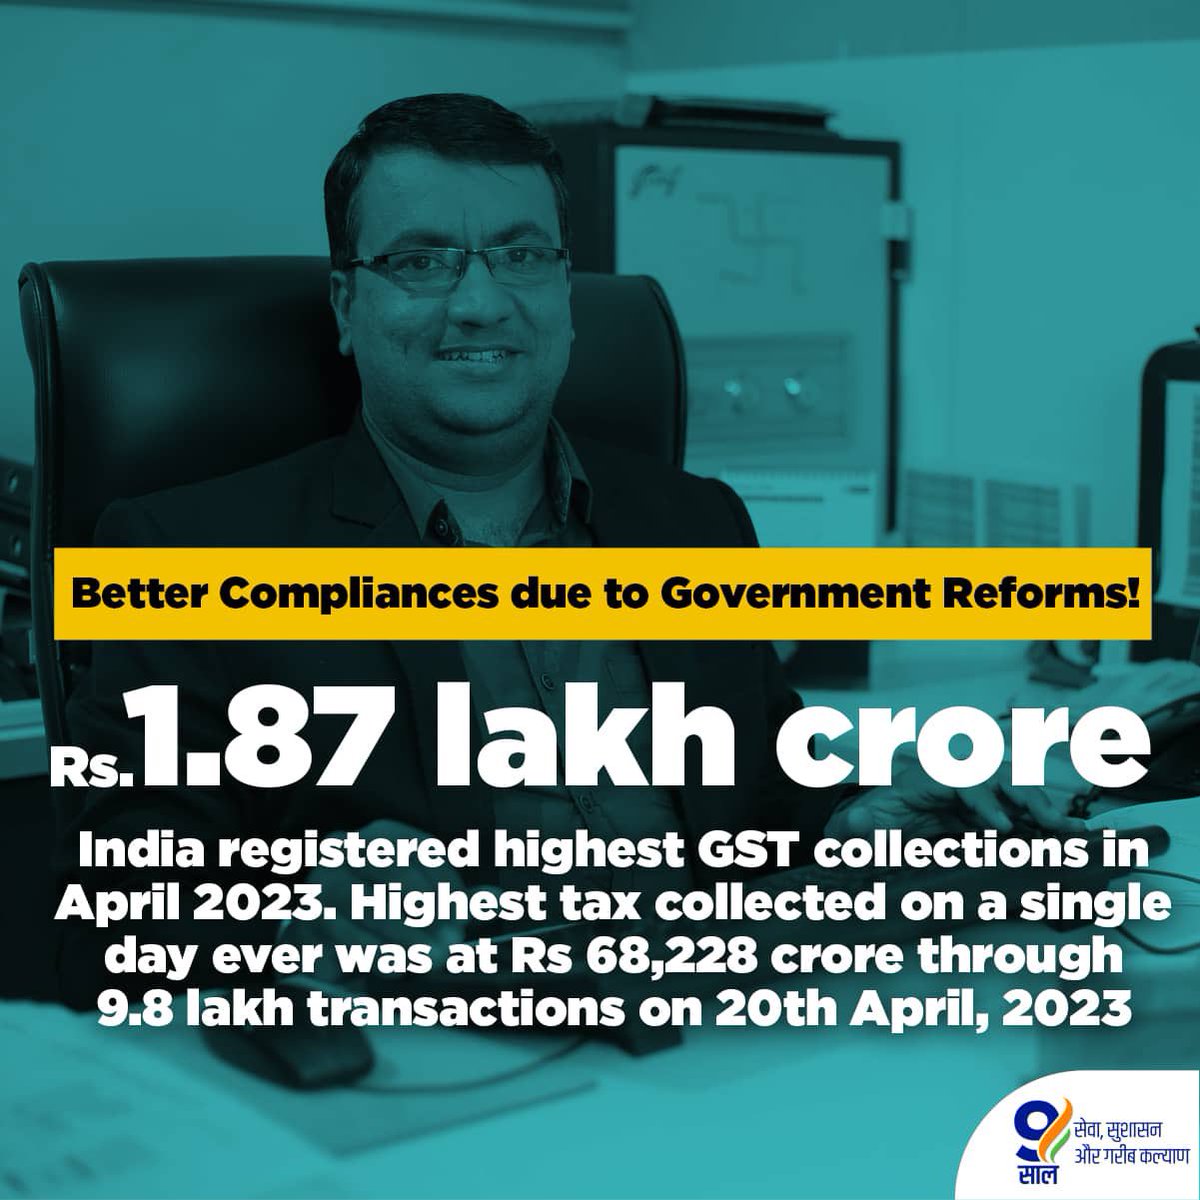 Growth of economy and better compliances due to reforms undertaken by the Modi Government led to the record GST collections in 2023.

#9YearsOfEconomicReforms